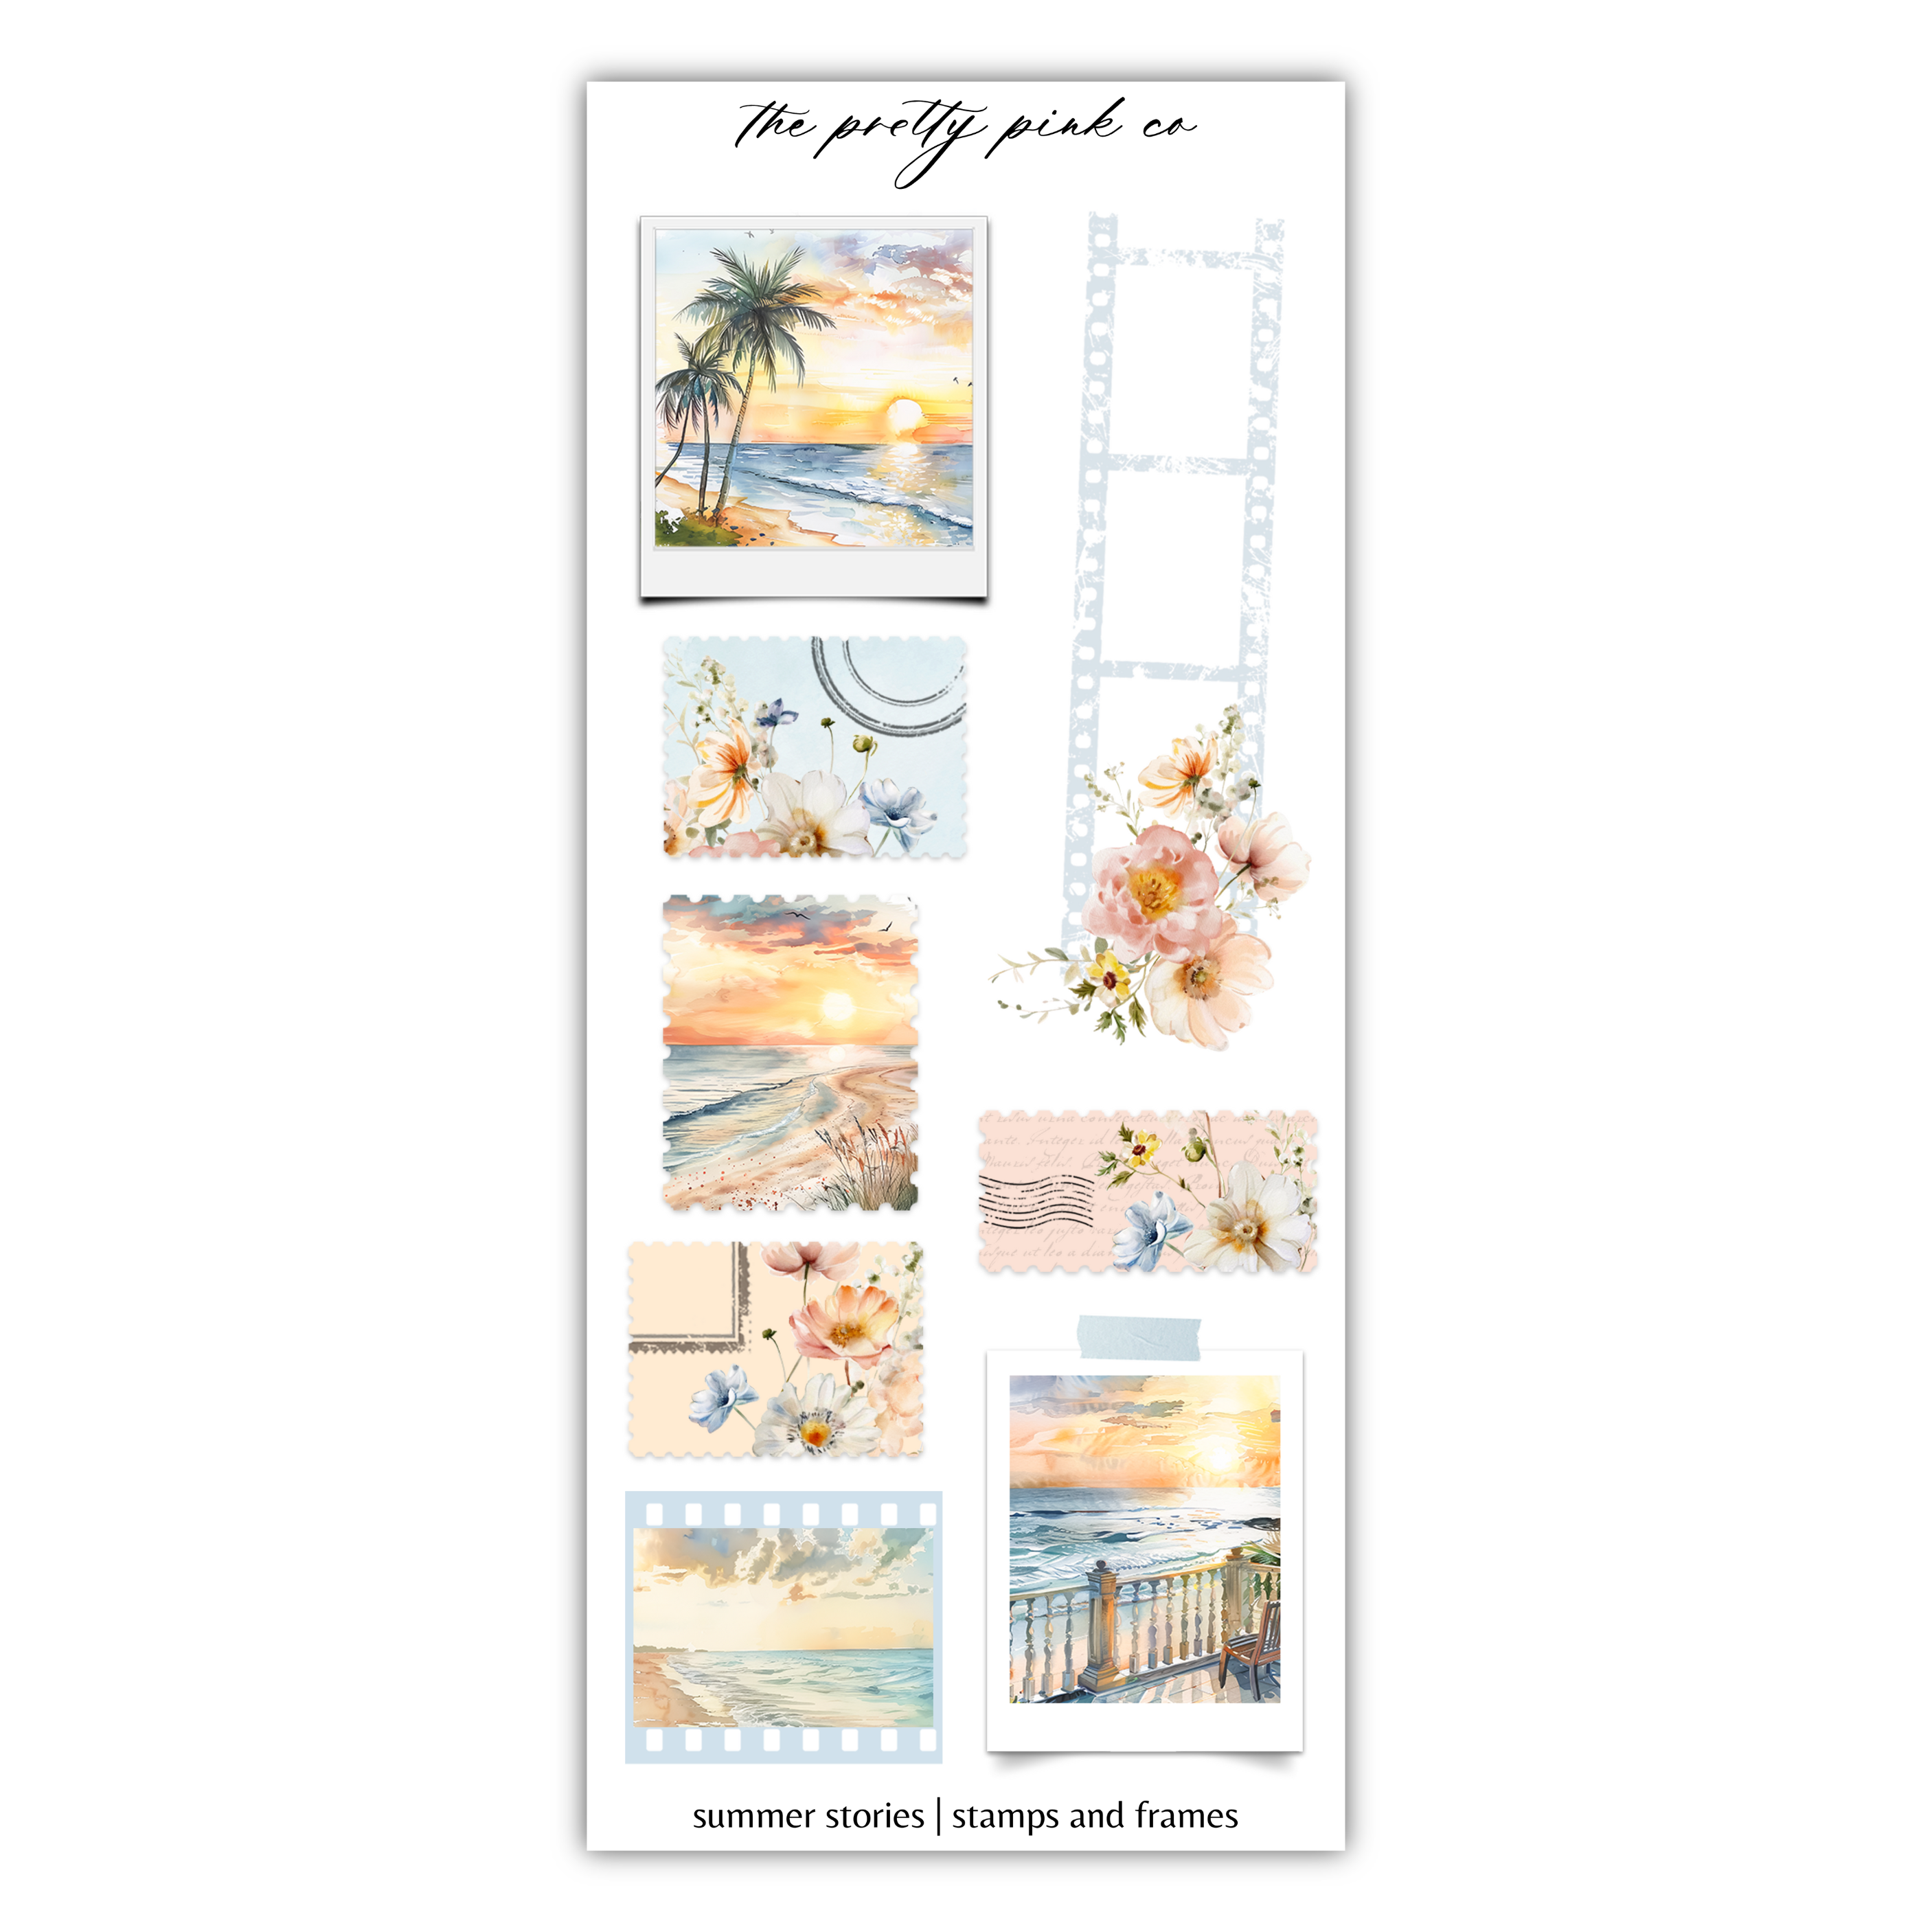 a sticker of a beach scene with flowers and palm trees